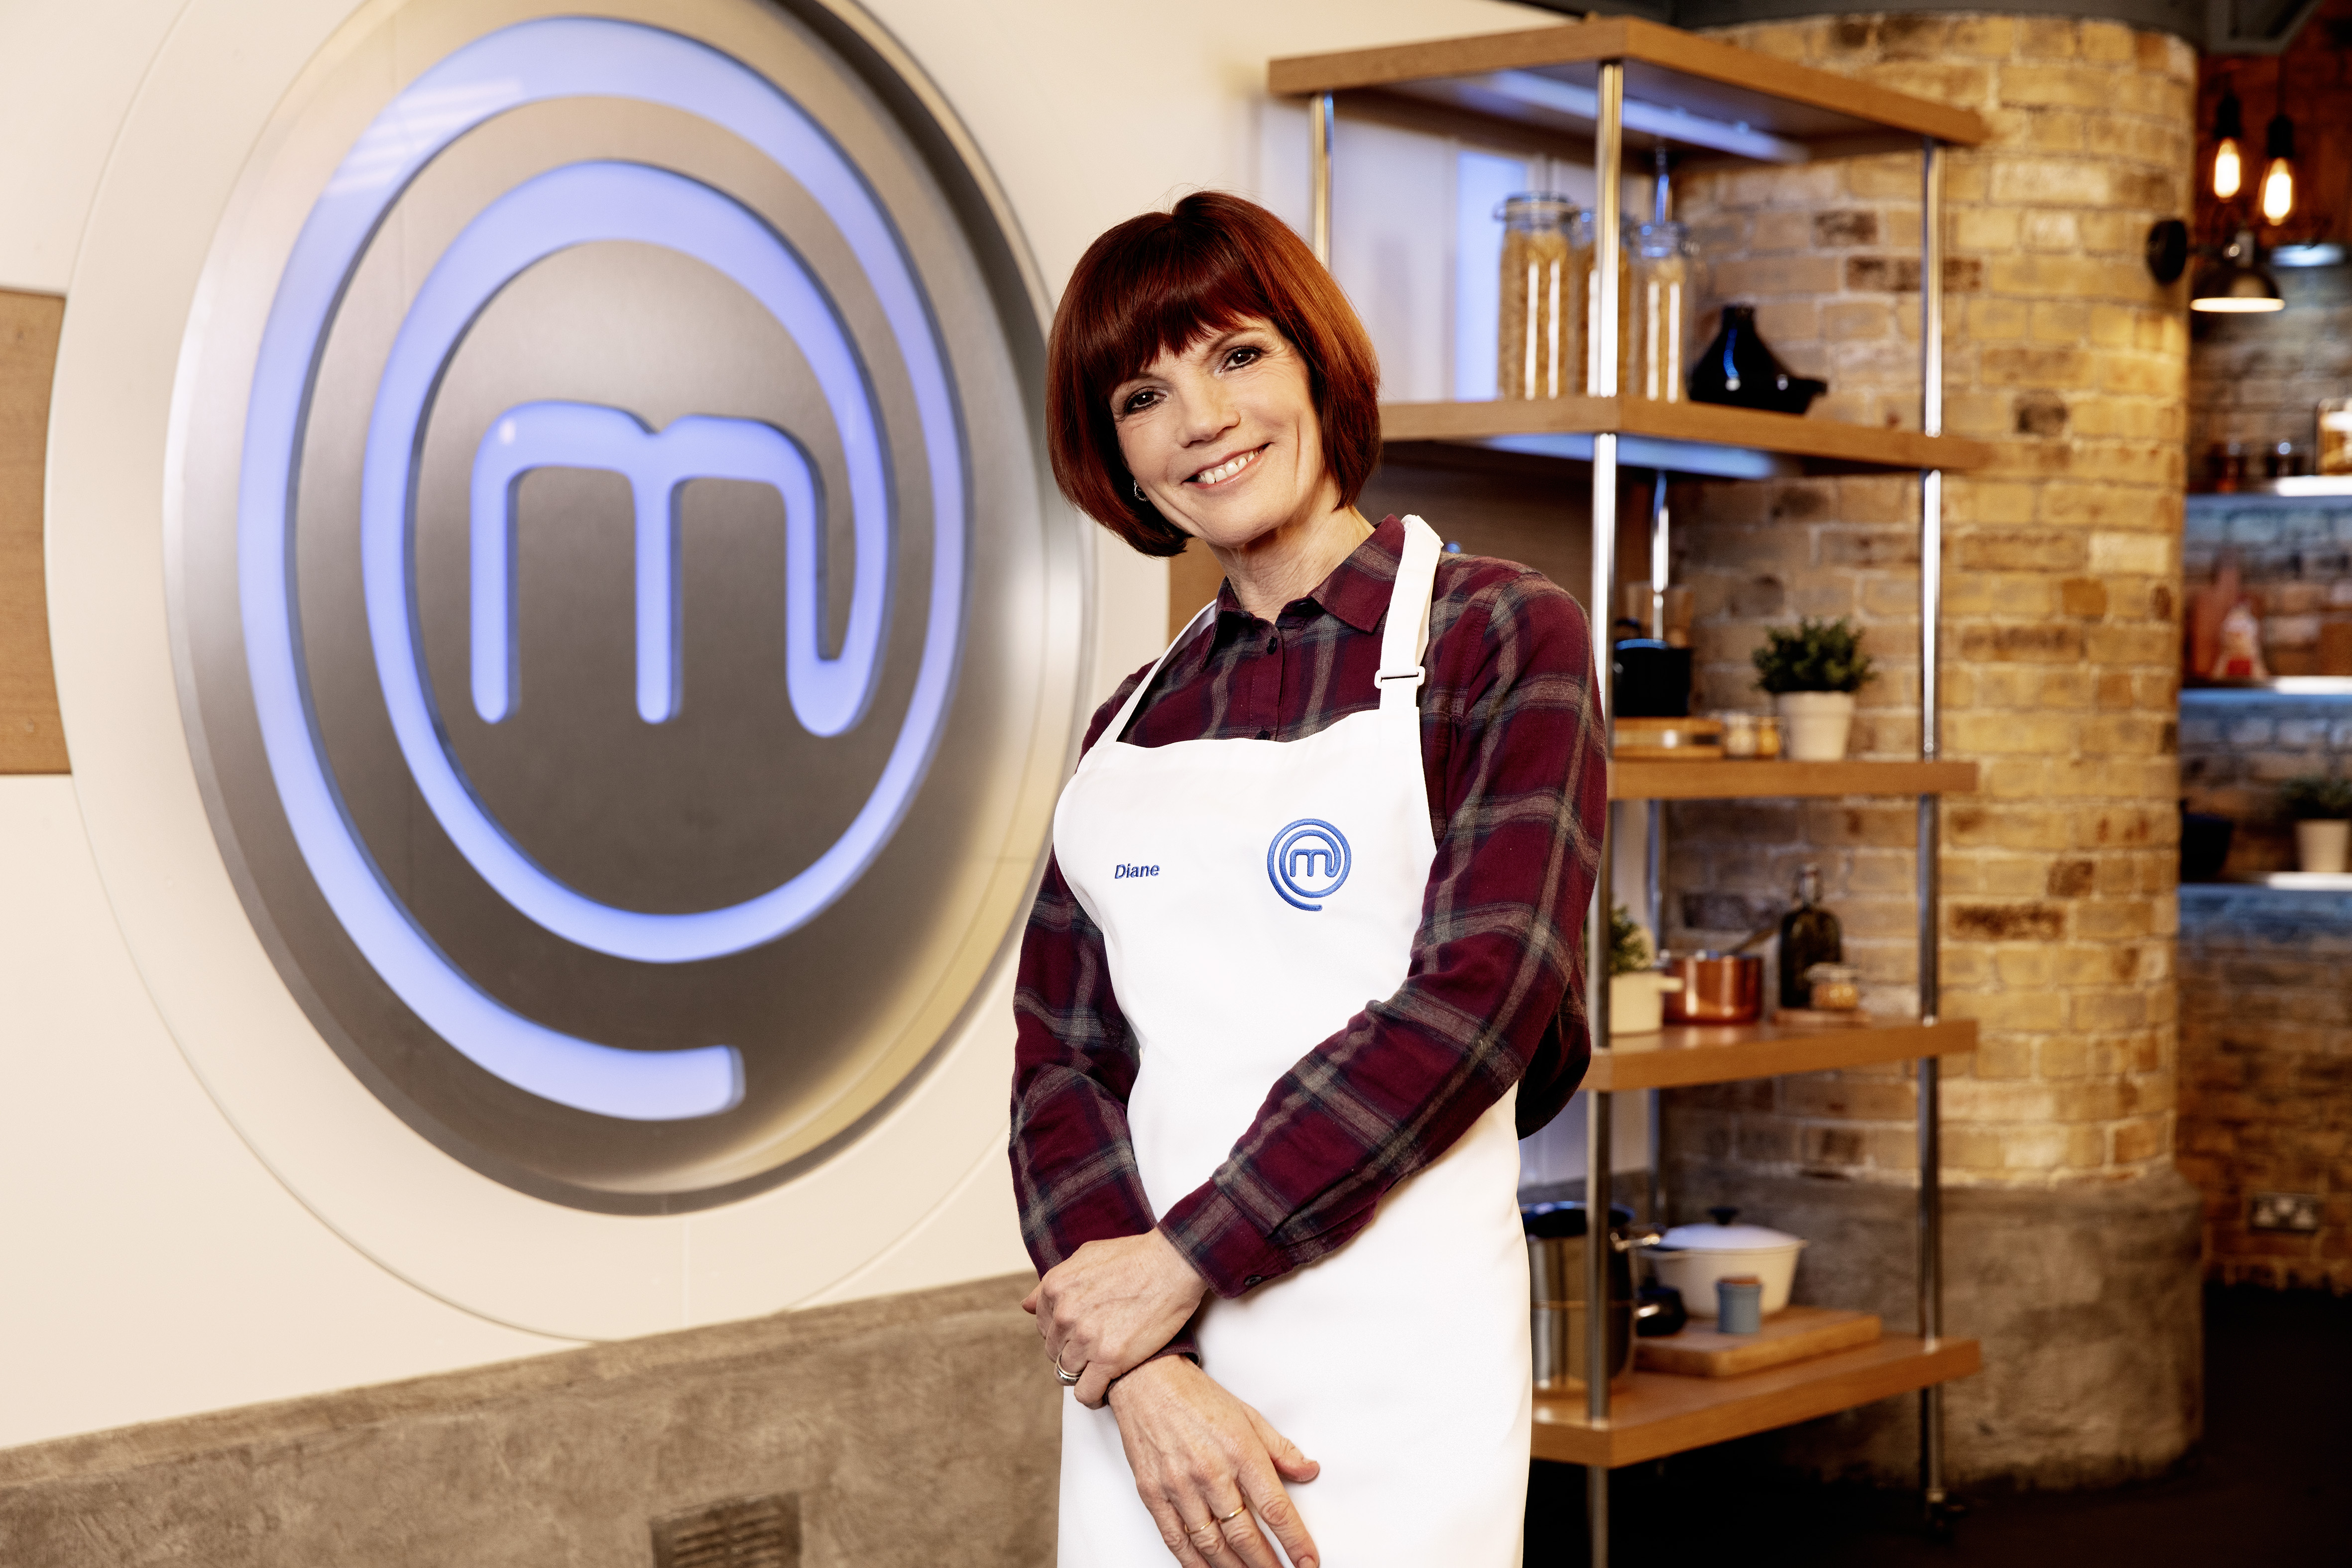 Diane Carson from The Traitors smiles while standing in the Celebrity MasterChef kitchen